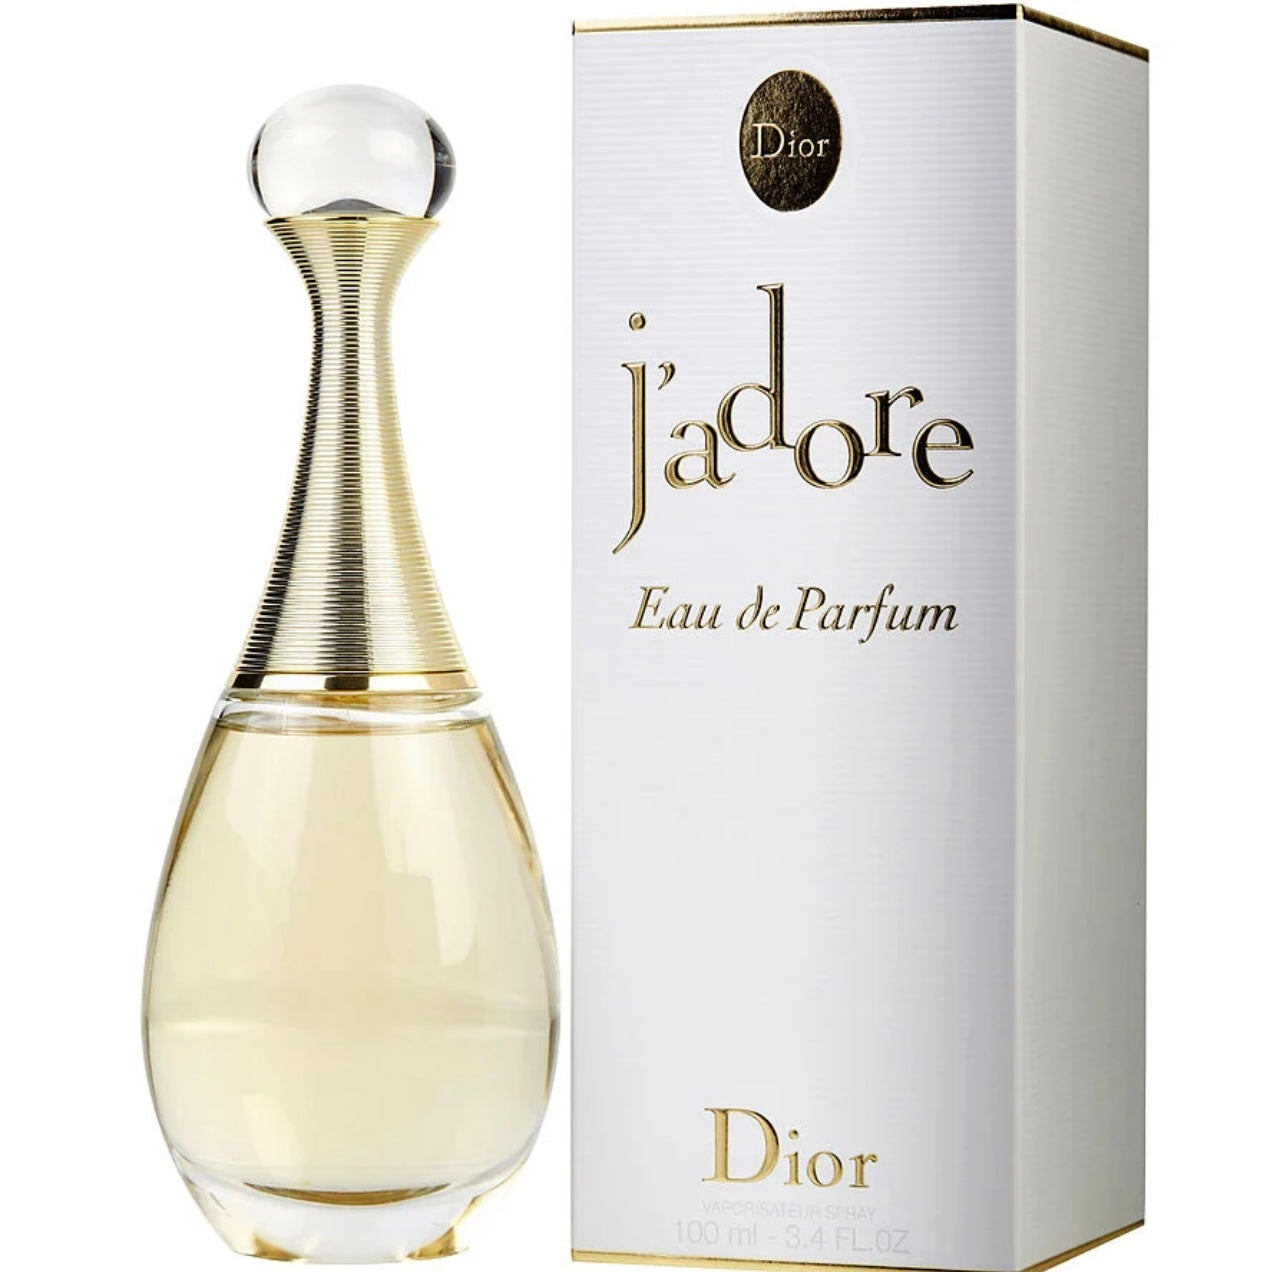 J'Adore perfume by Dior dupe